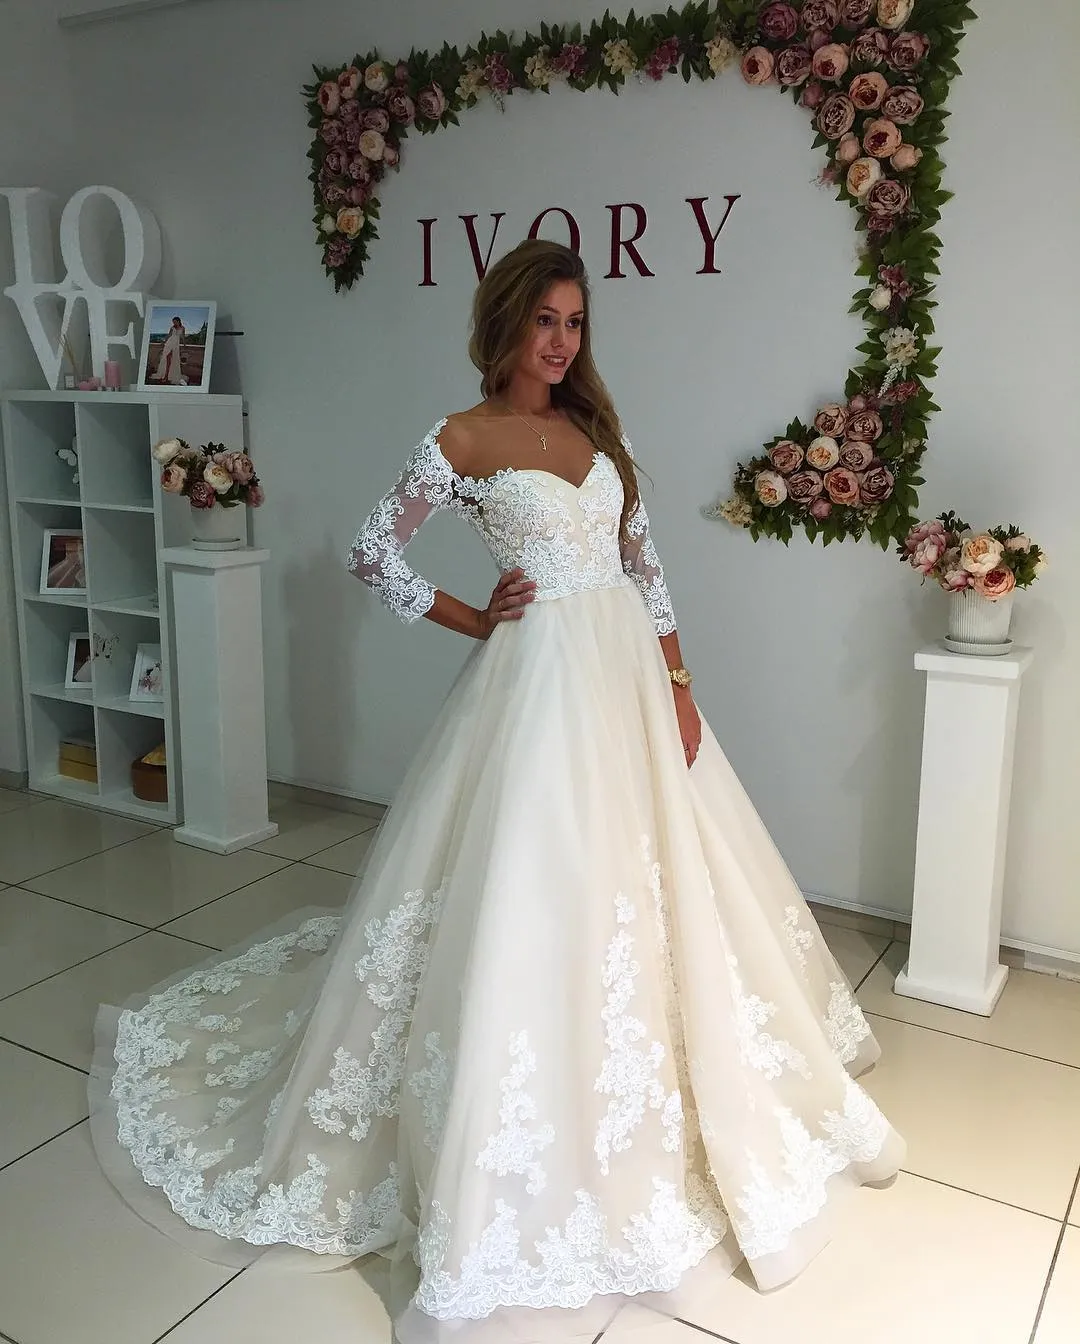 New Designer Sweetheart Lace Wedding Dresses Sheer Neck 3/4 Sleeves Lace Applique Sweep Train Wedding Dress Bridal Gowns Custom Made